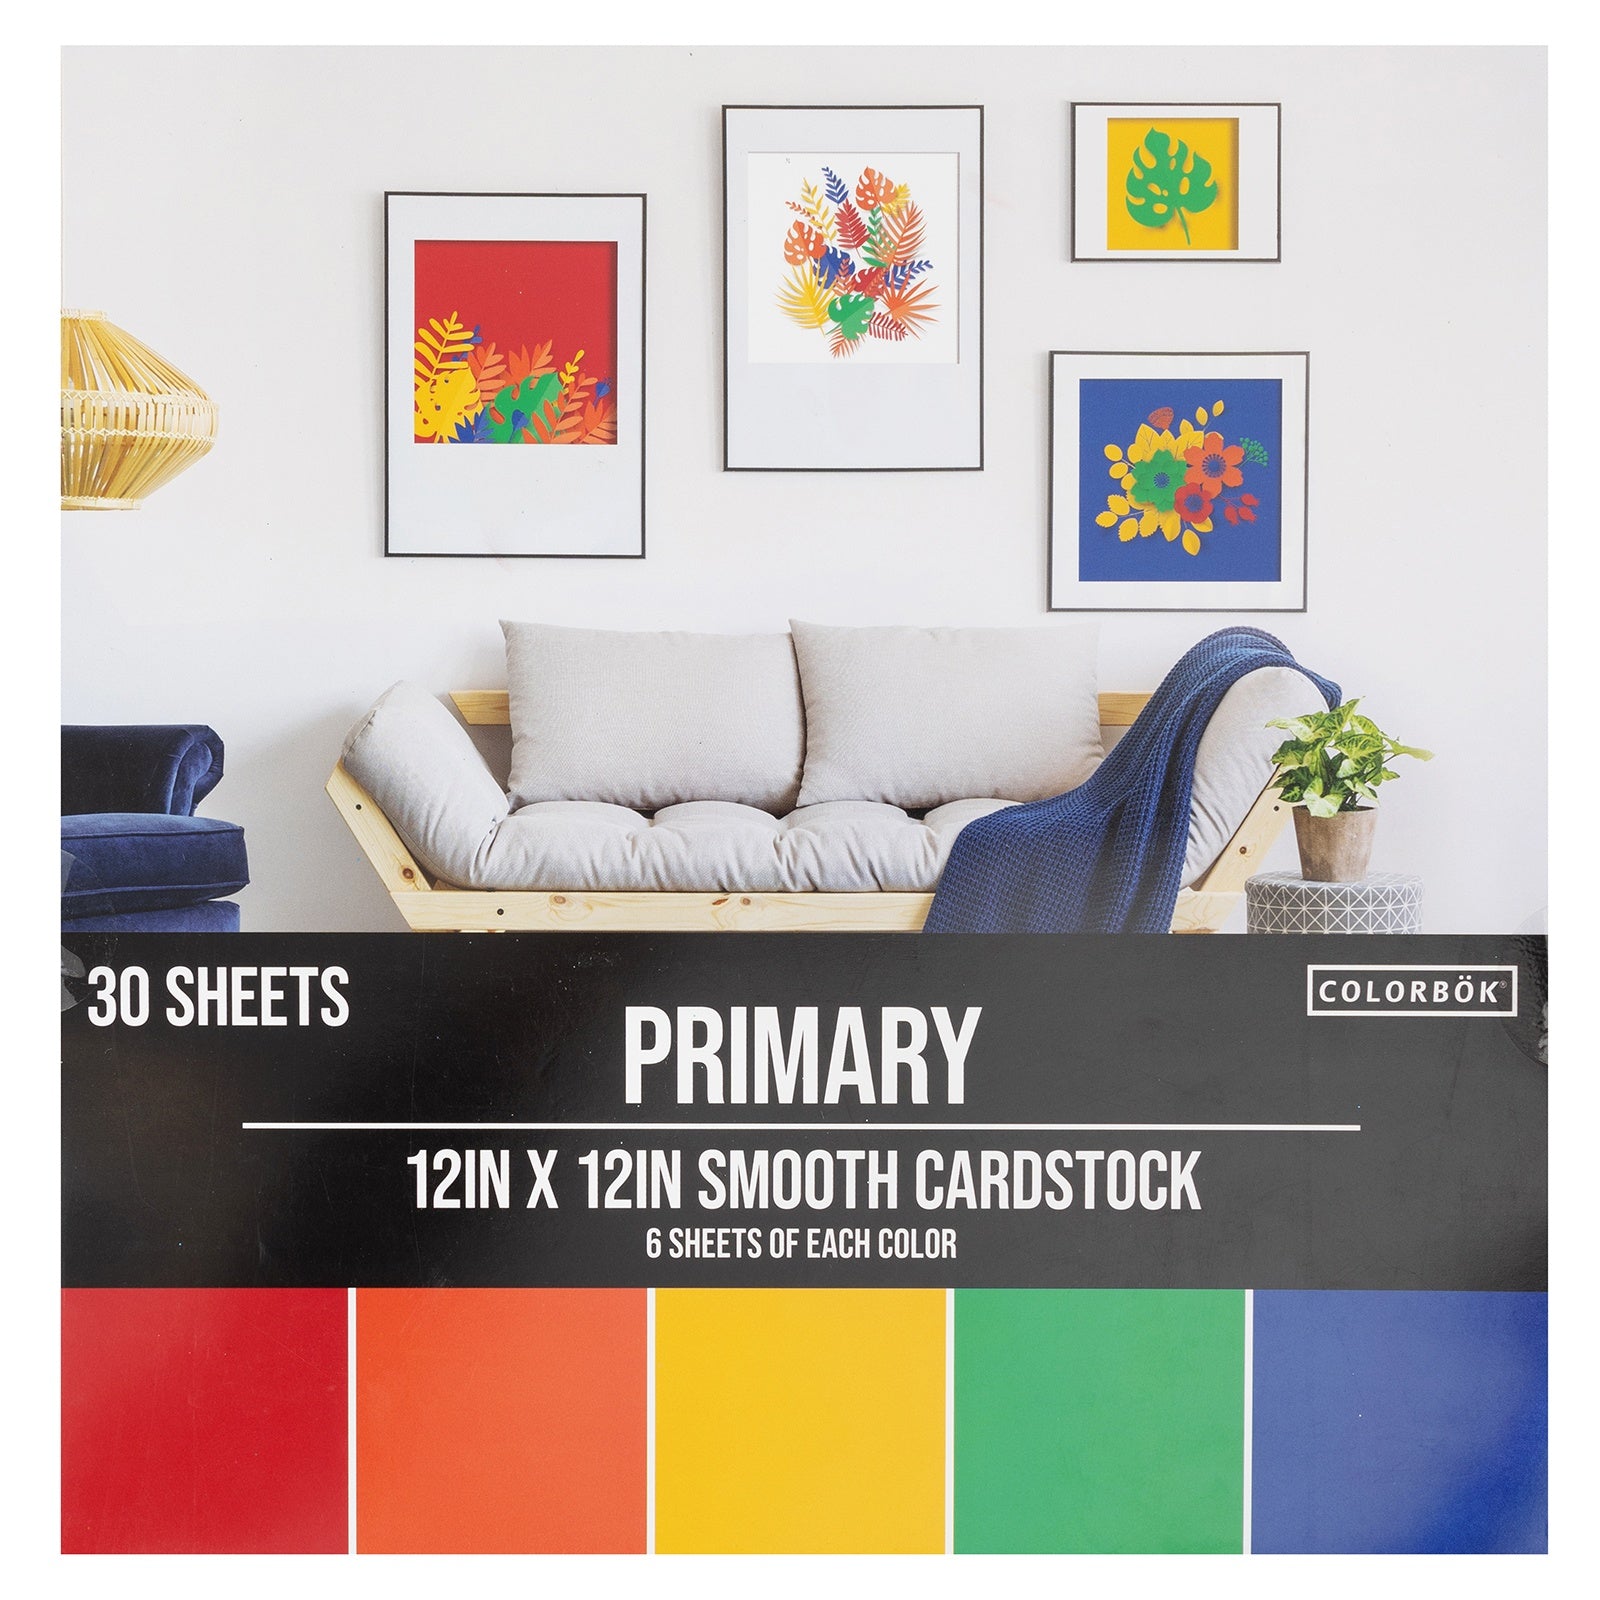 Primary One 5-Color Assortment Paper - 8 1/2 x 11 in 24 lb Writing Smooth